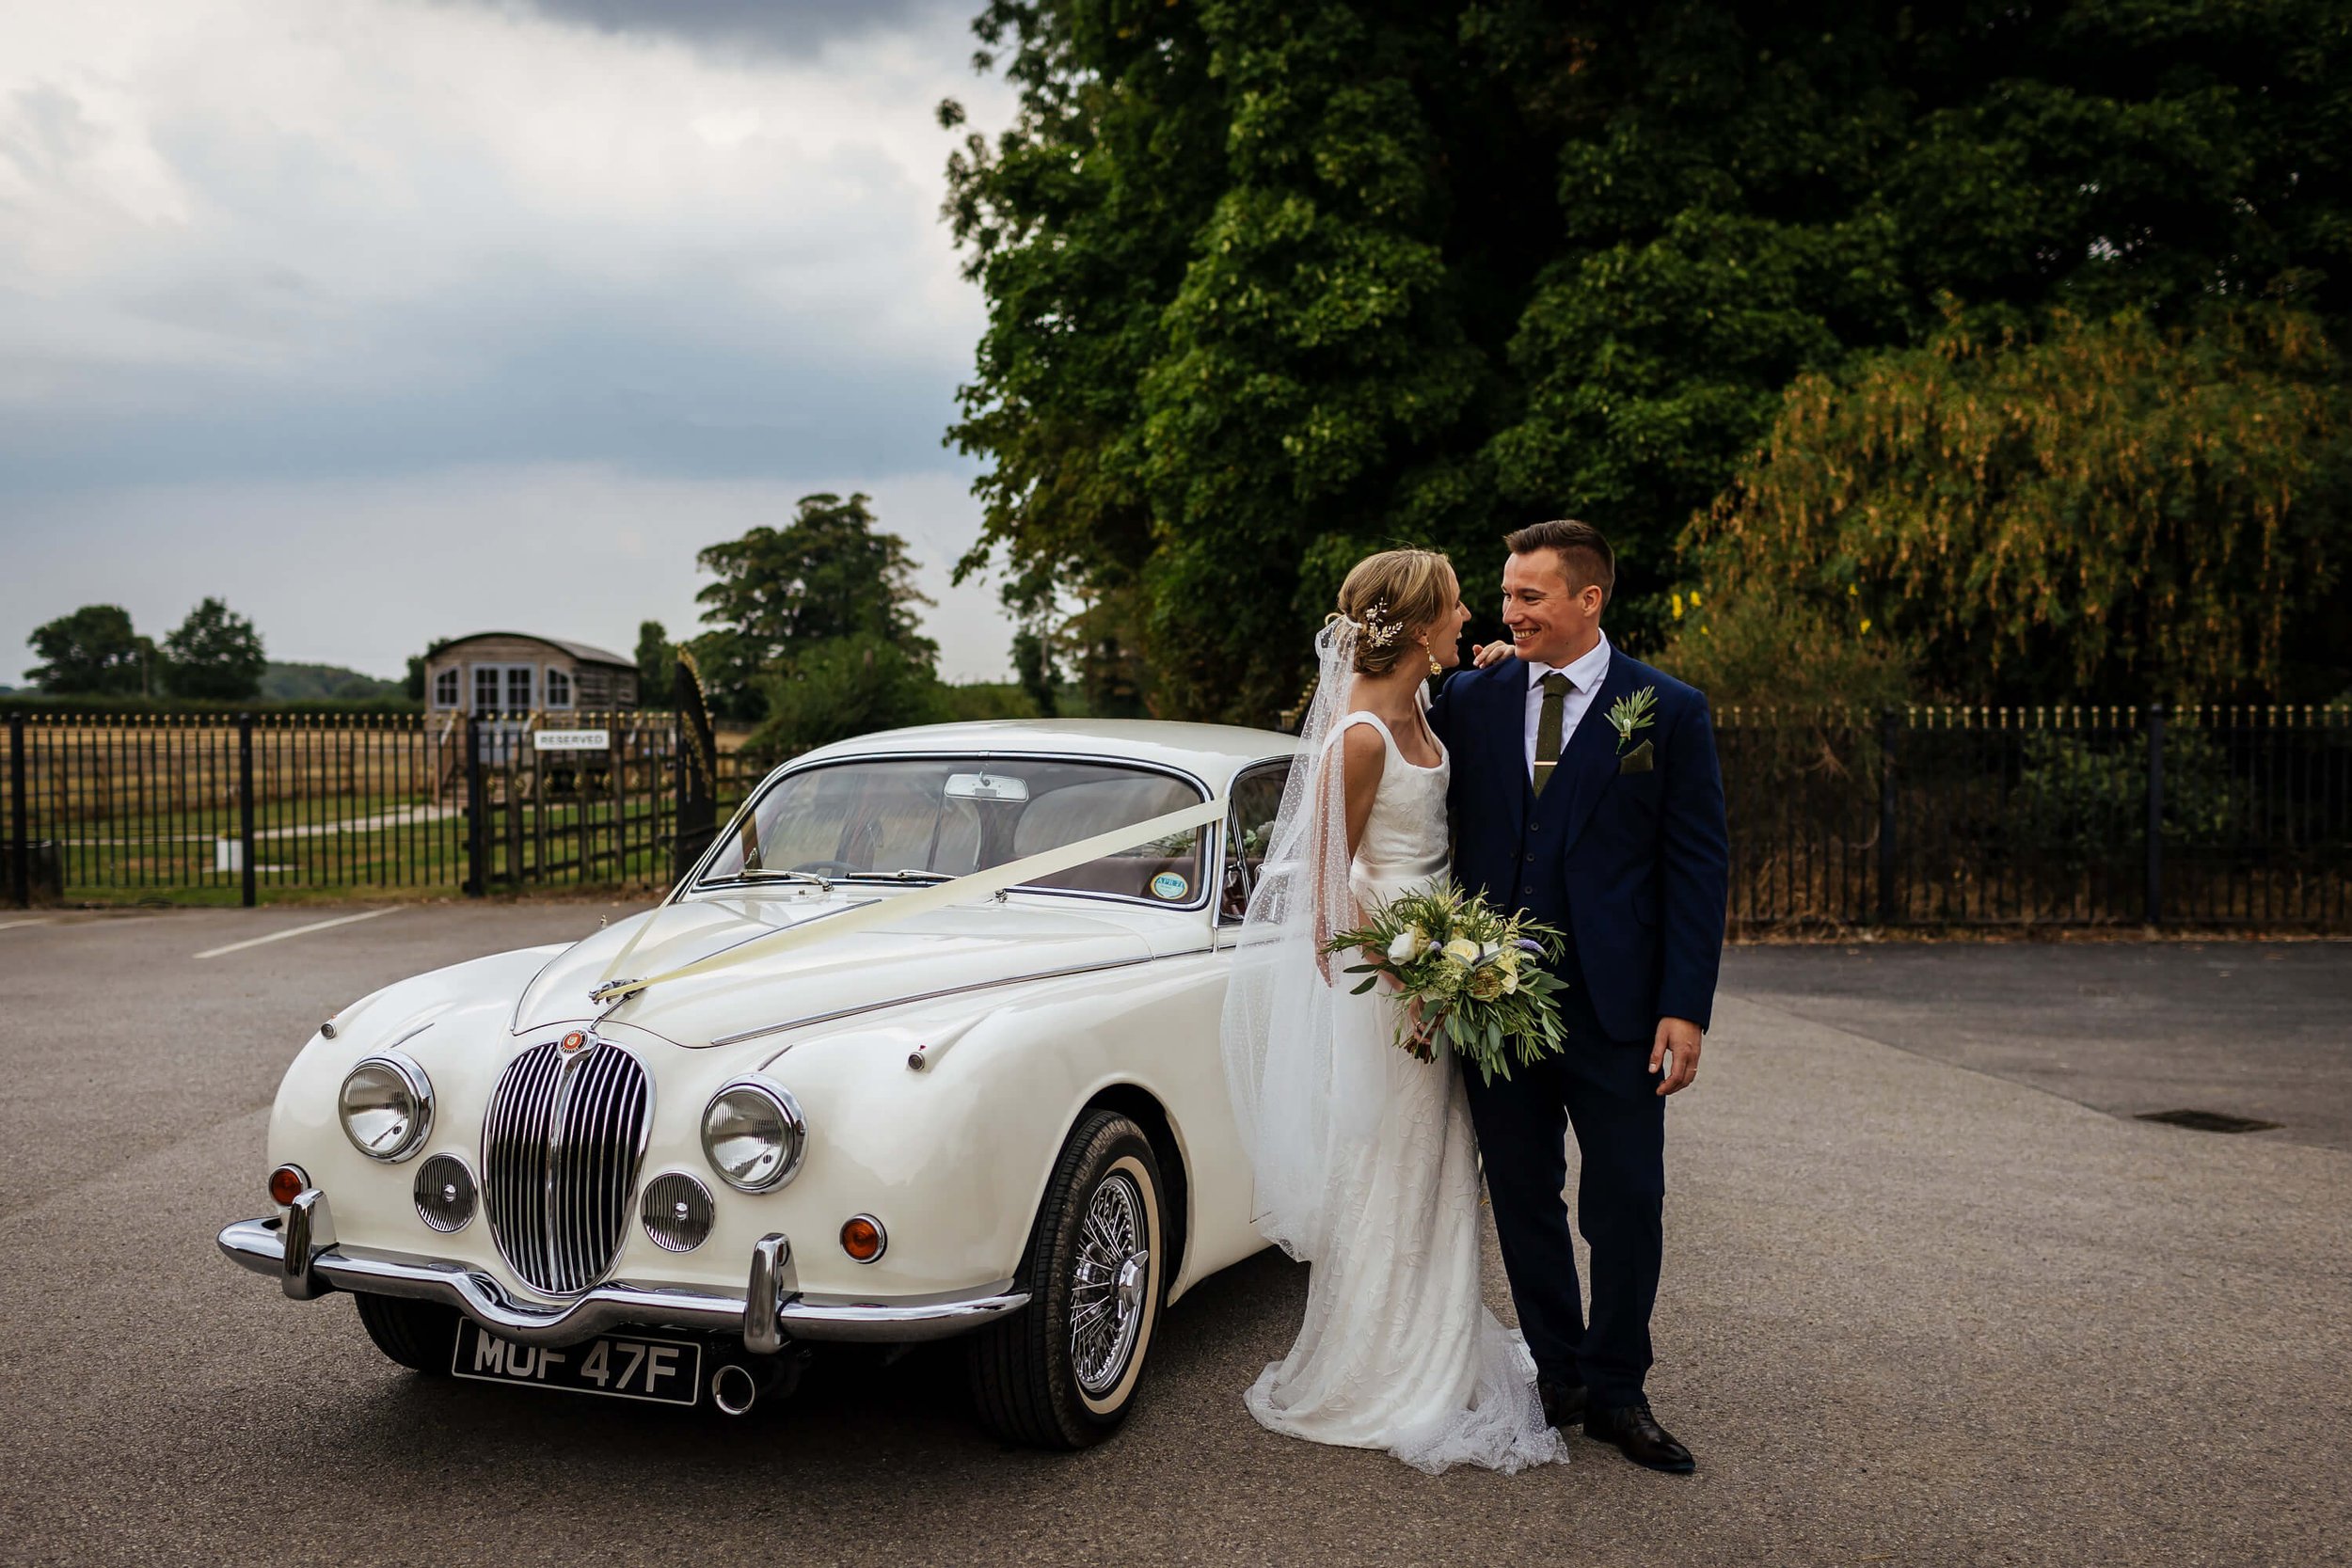 Bride and groom pose for a photo in front of their wedding car